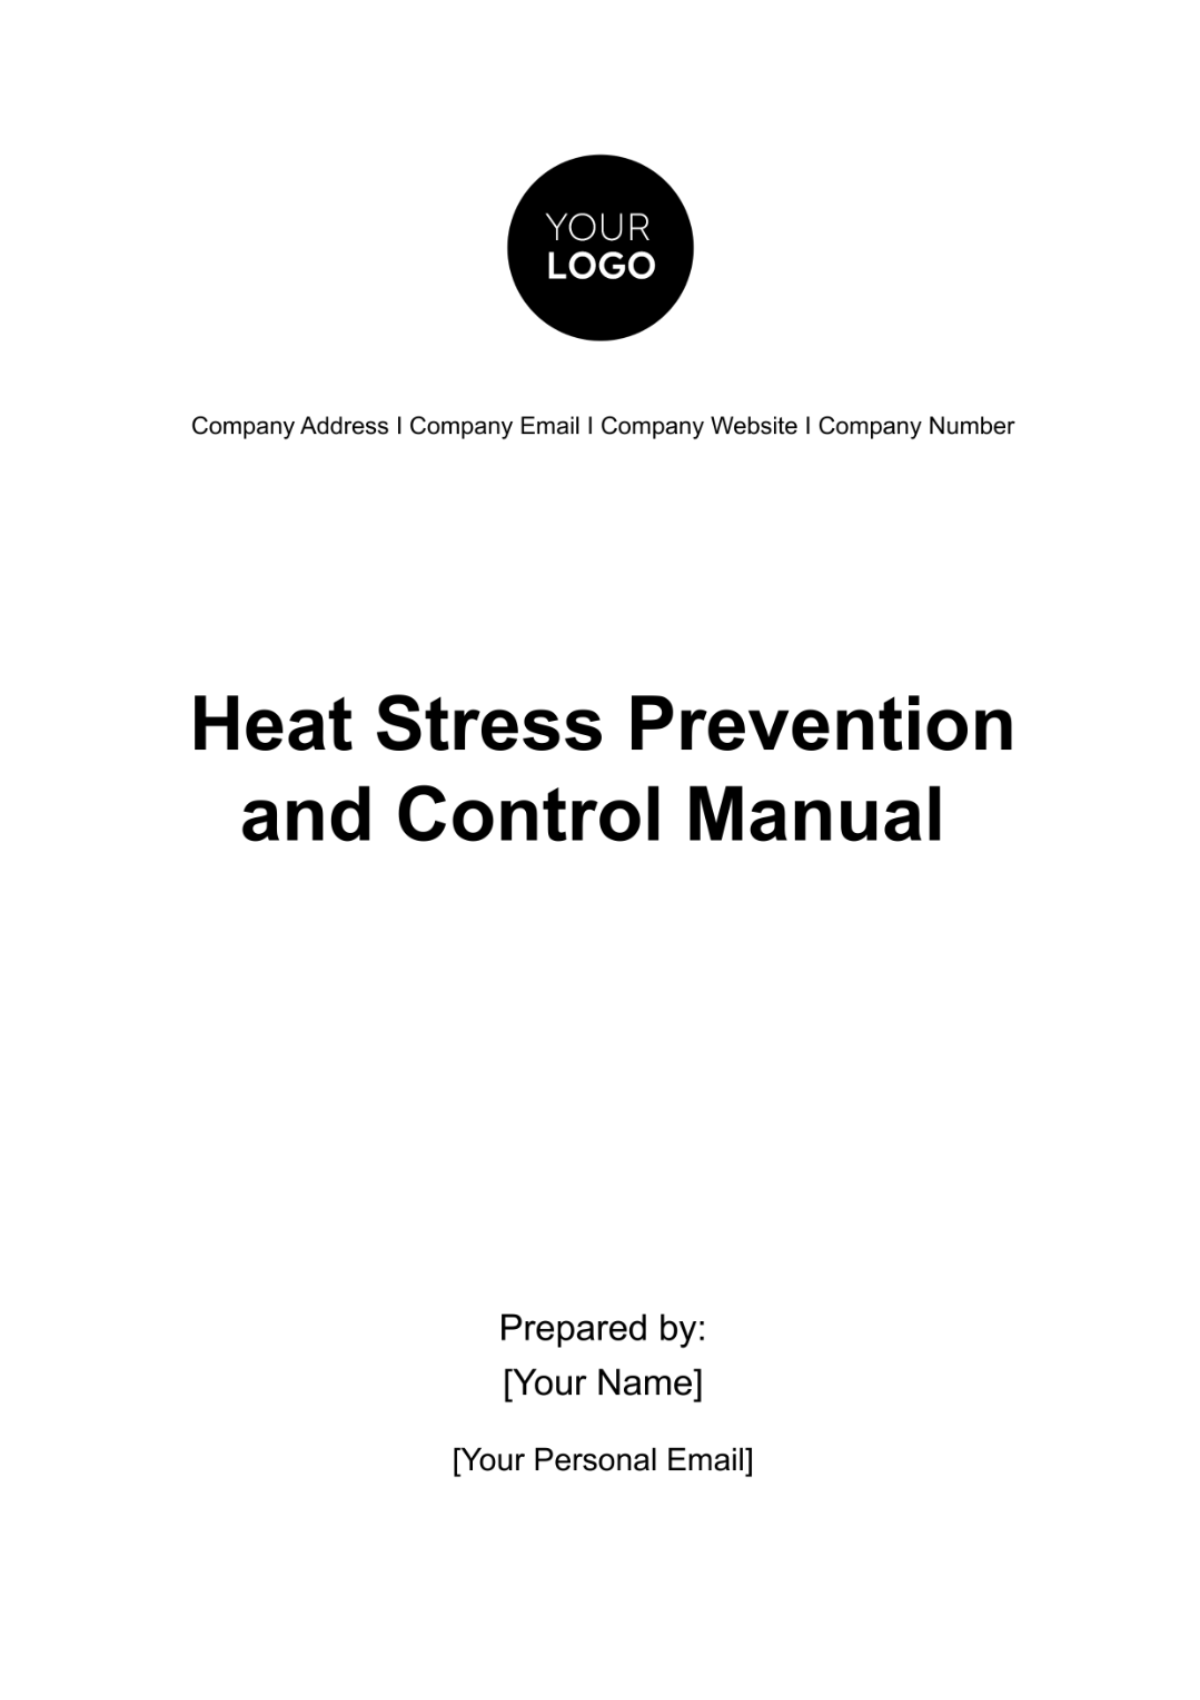 Free Heat Stress Prevention and Control Manual HR Template